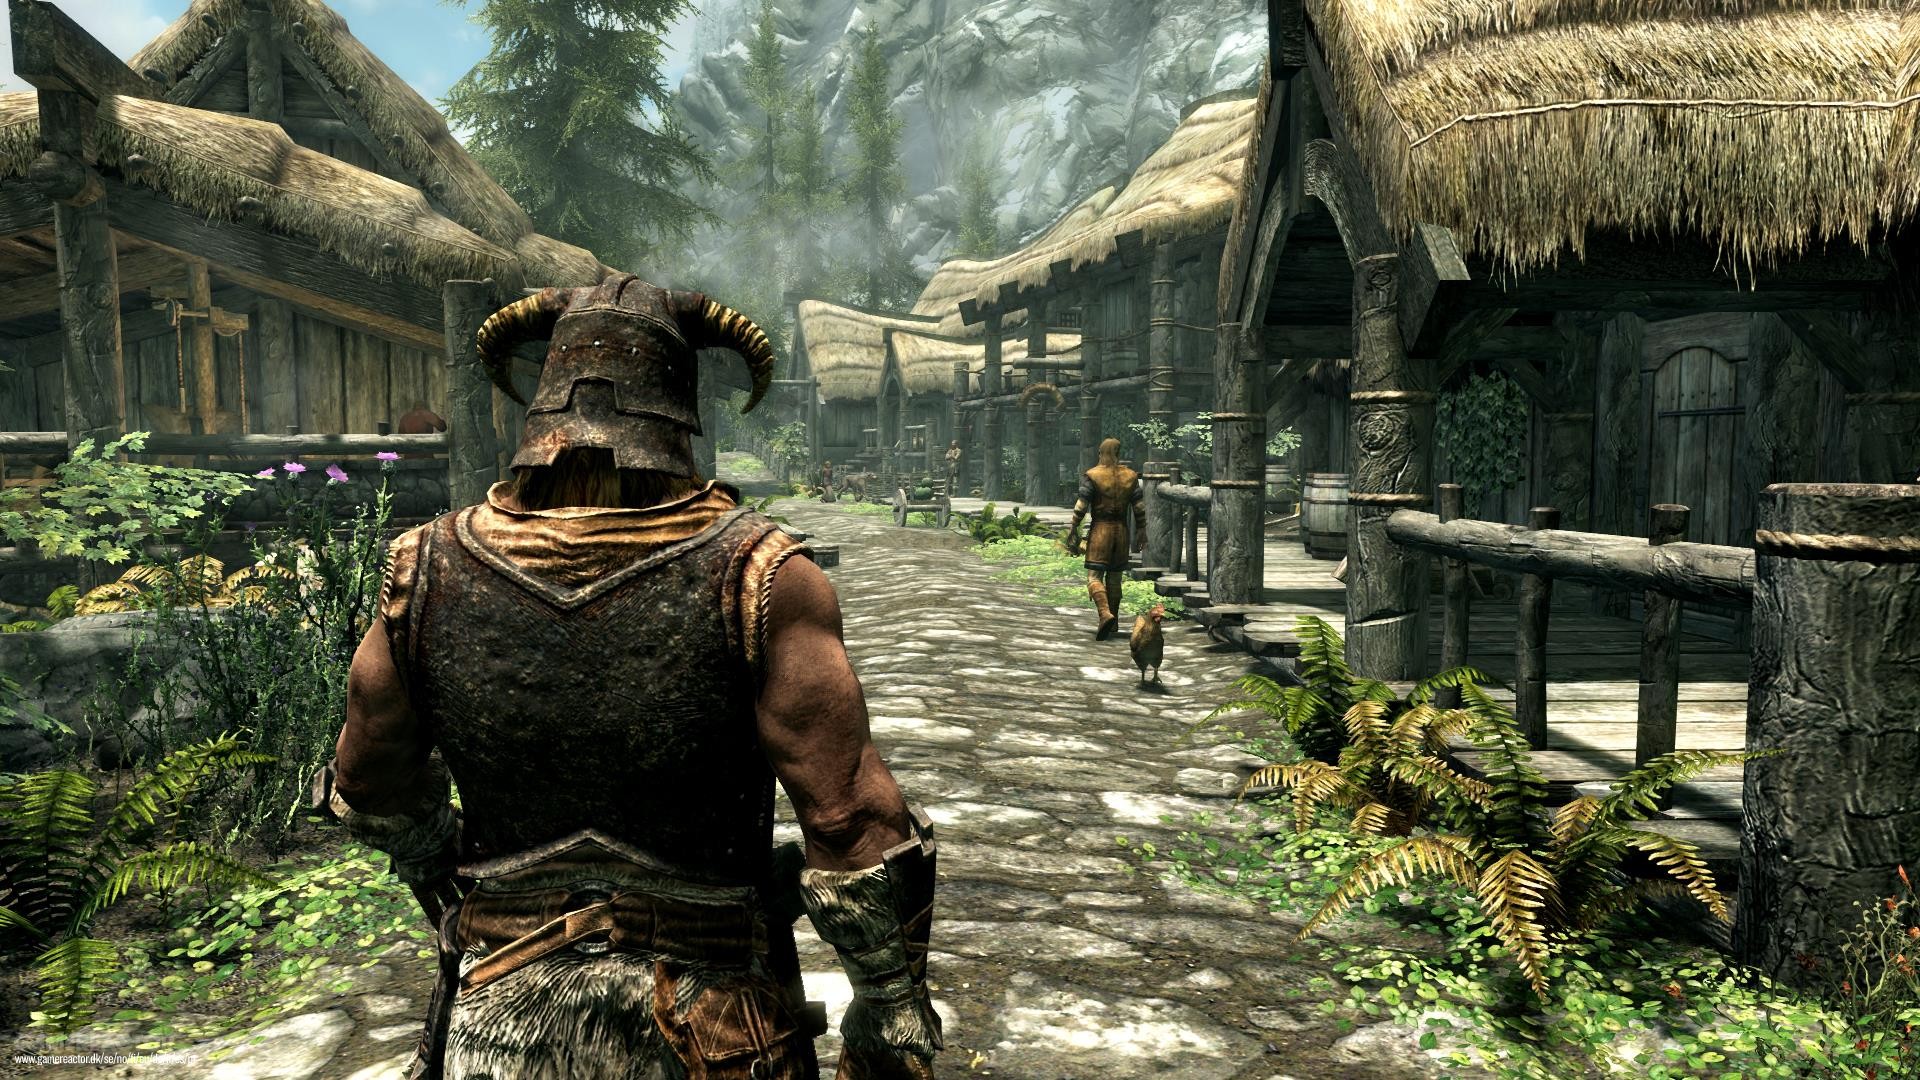 The Limitless World of Skyrim Expands as ChatGPT Creates New Quests